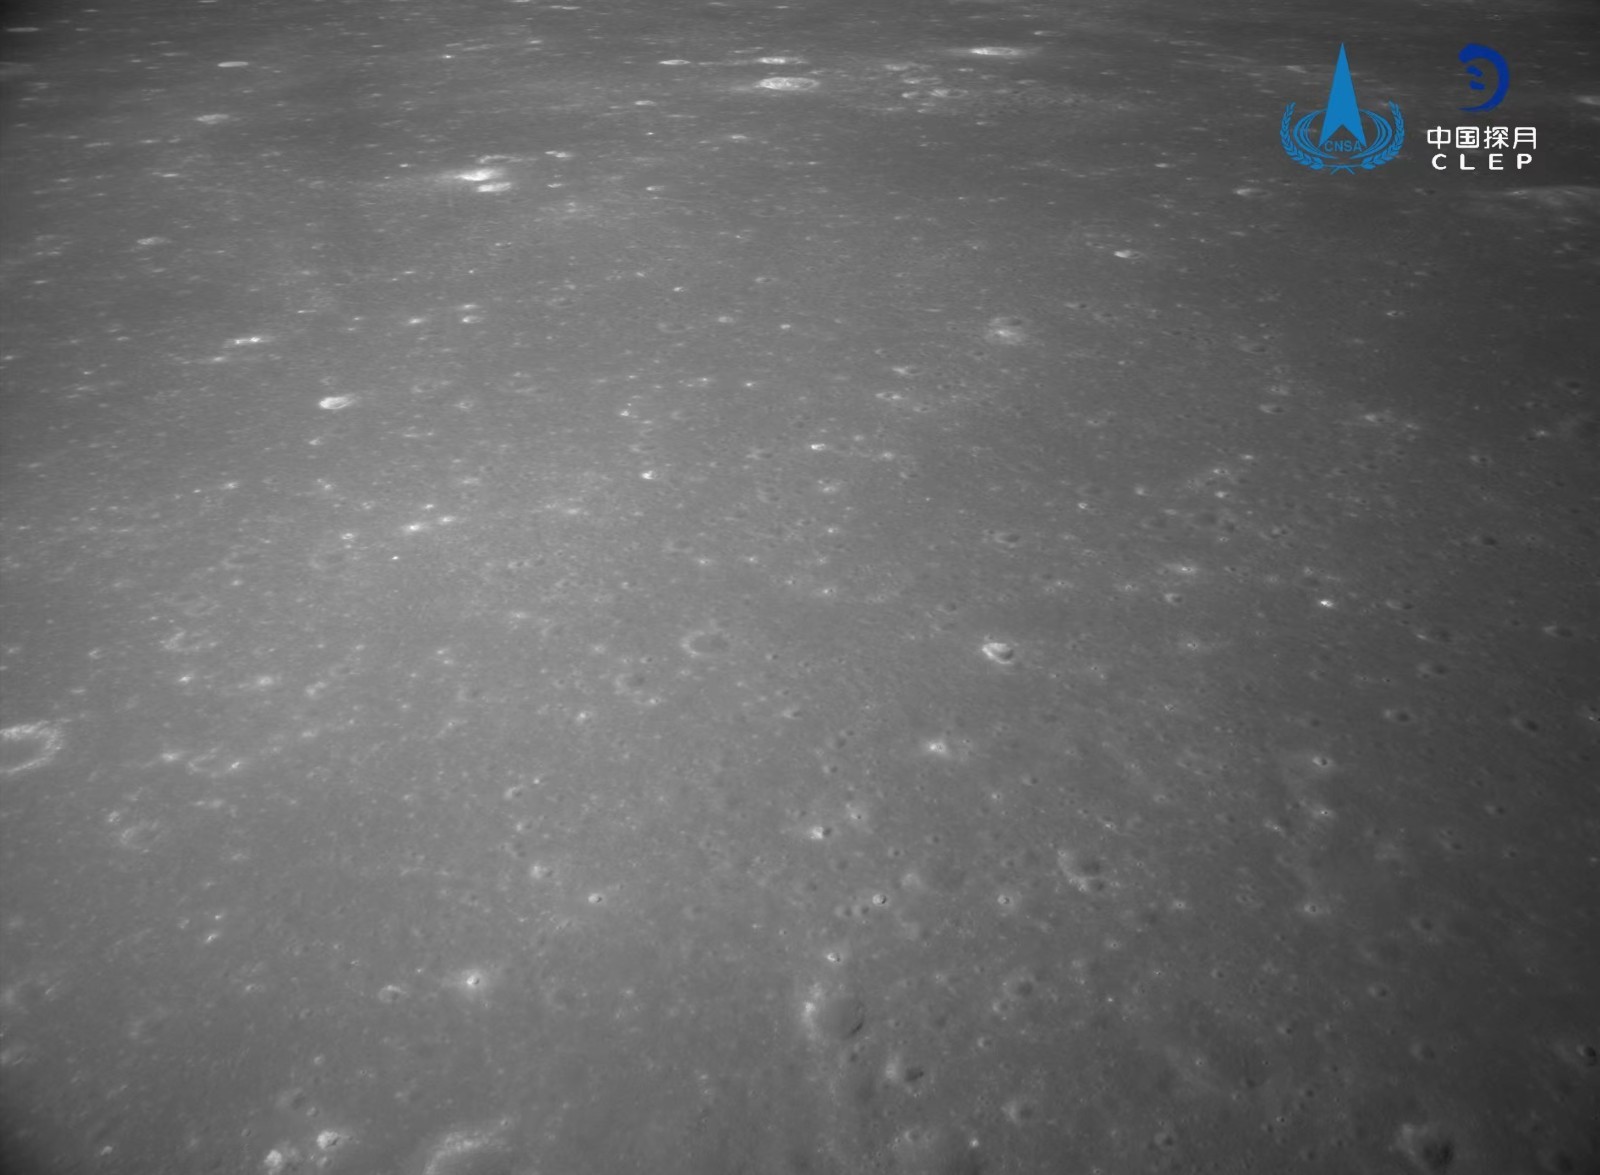 An image of the surface of the far side of the moon captured by the camera on the lander of China's Chang'e-6 probe. /CNSA